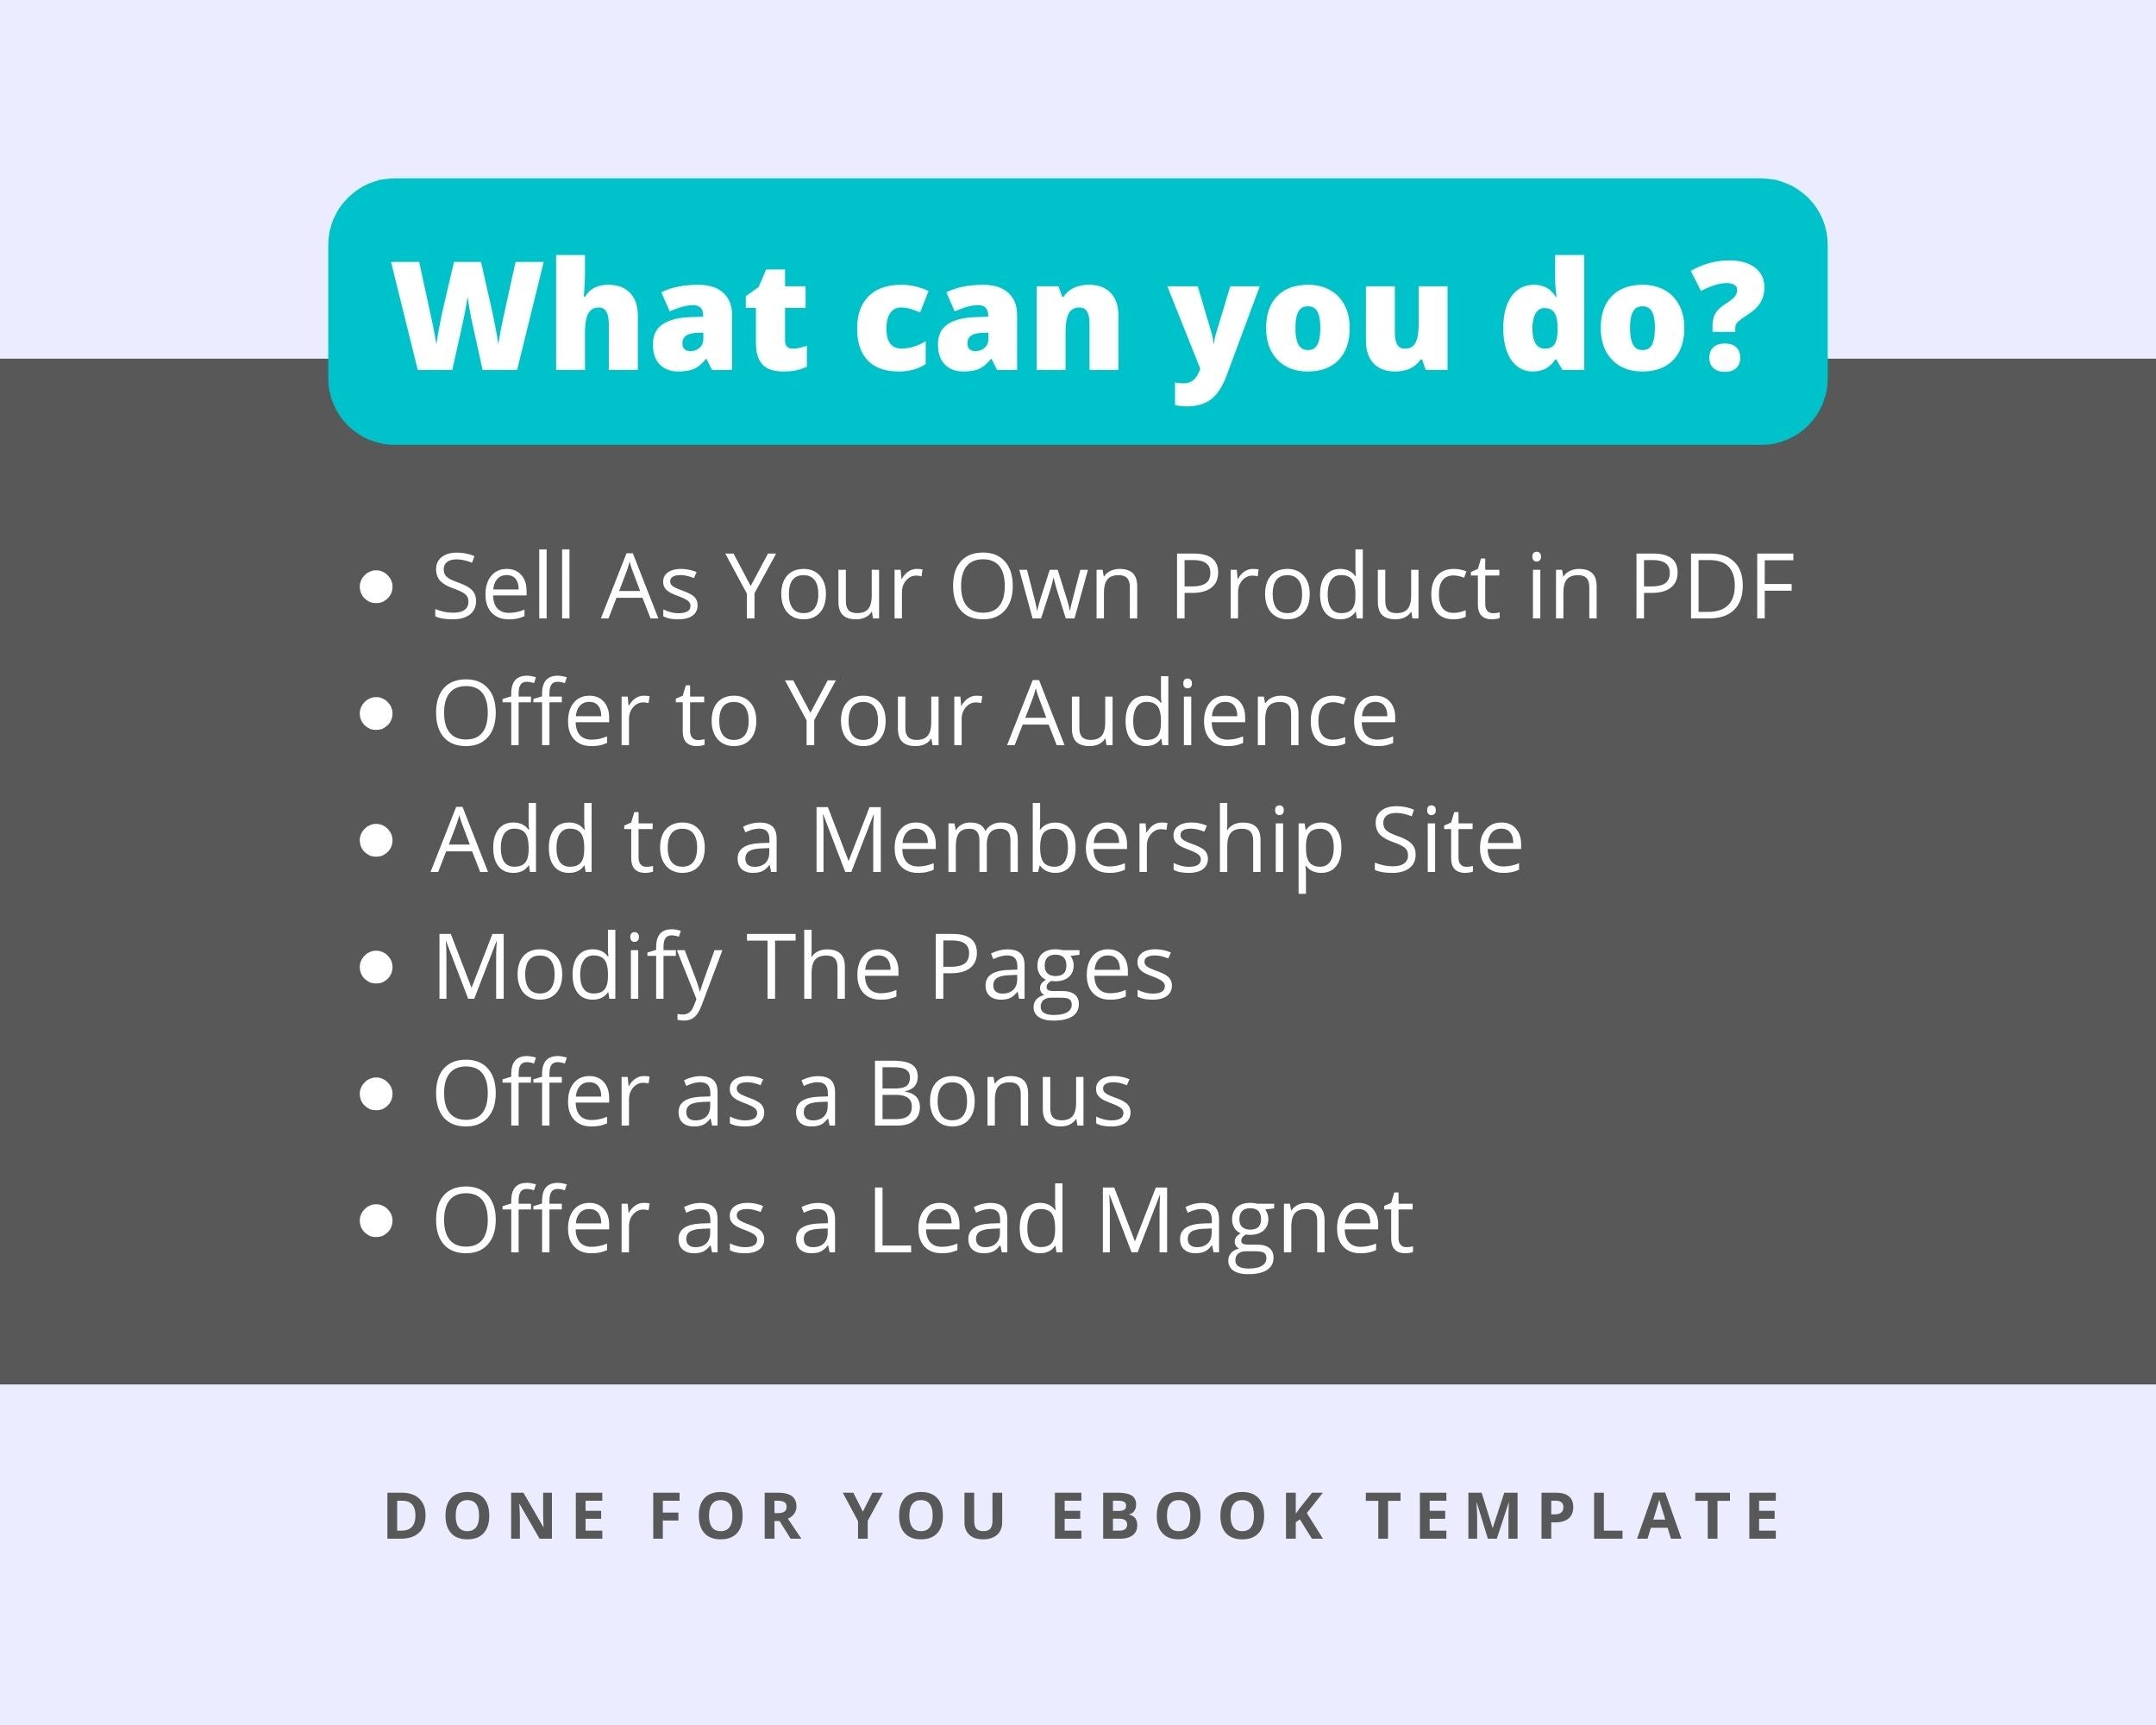 Editable Guide to Successful Freelancing Ebook | Done-for-You Ebook in Canva | Rebrandable and Resizable Canva Template